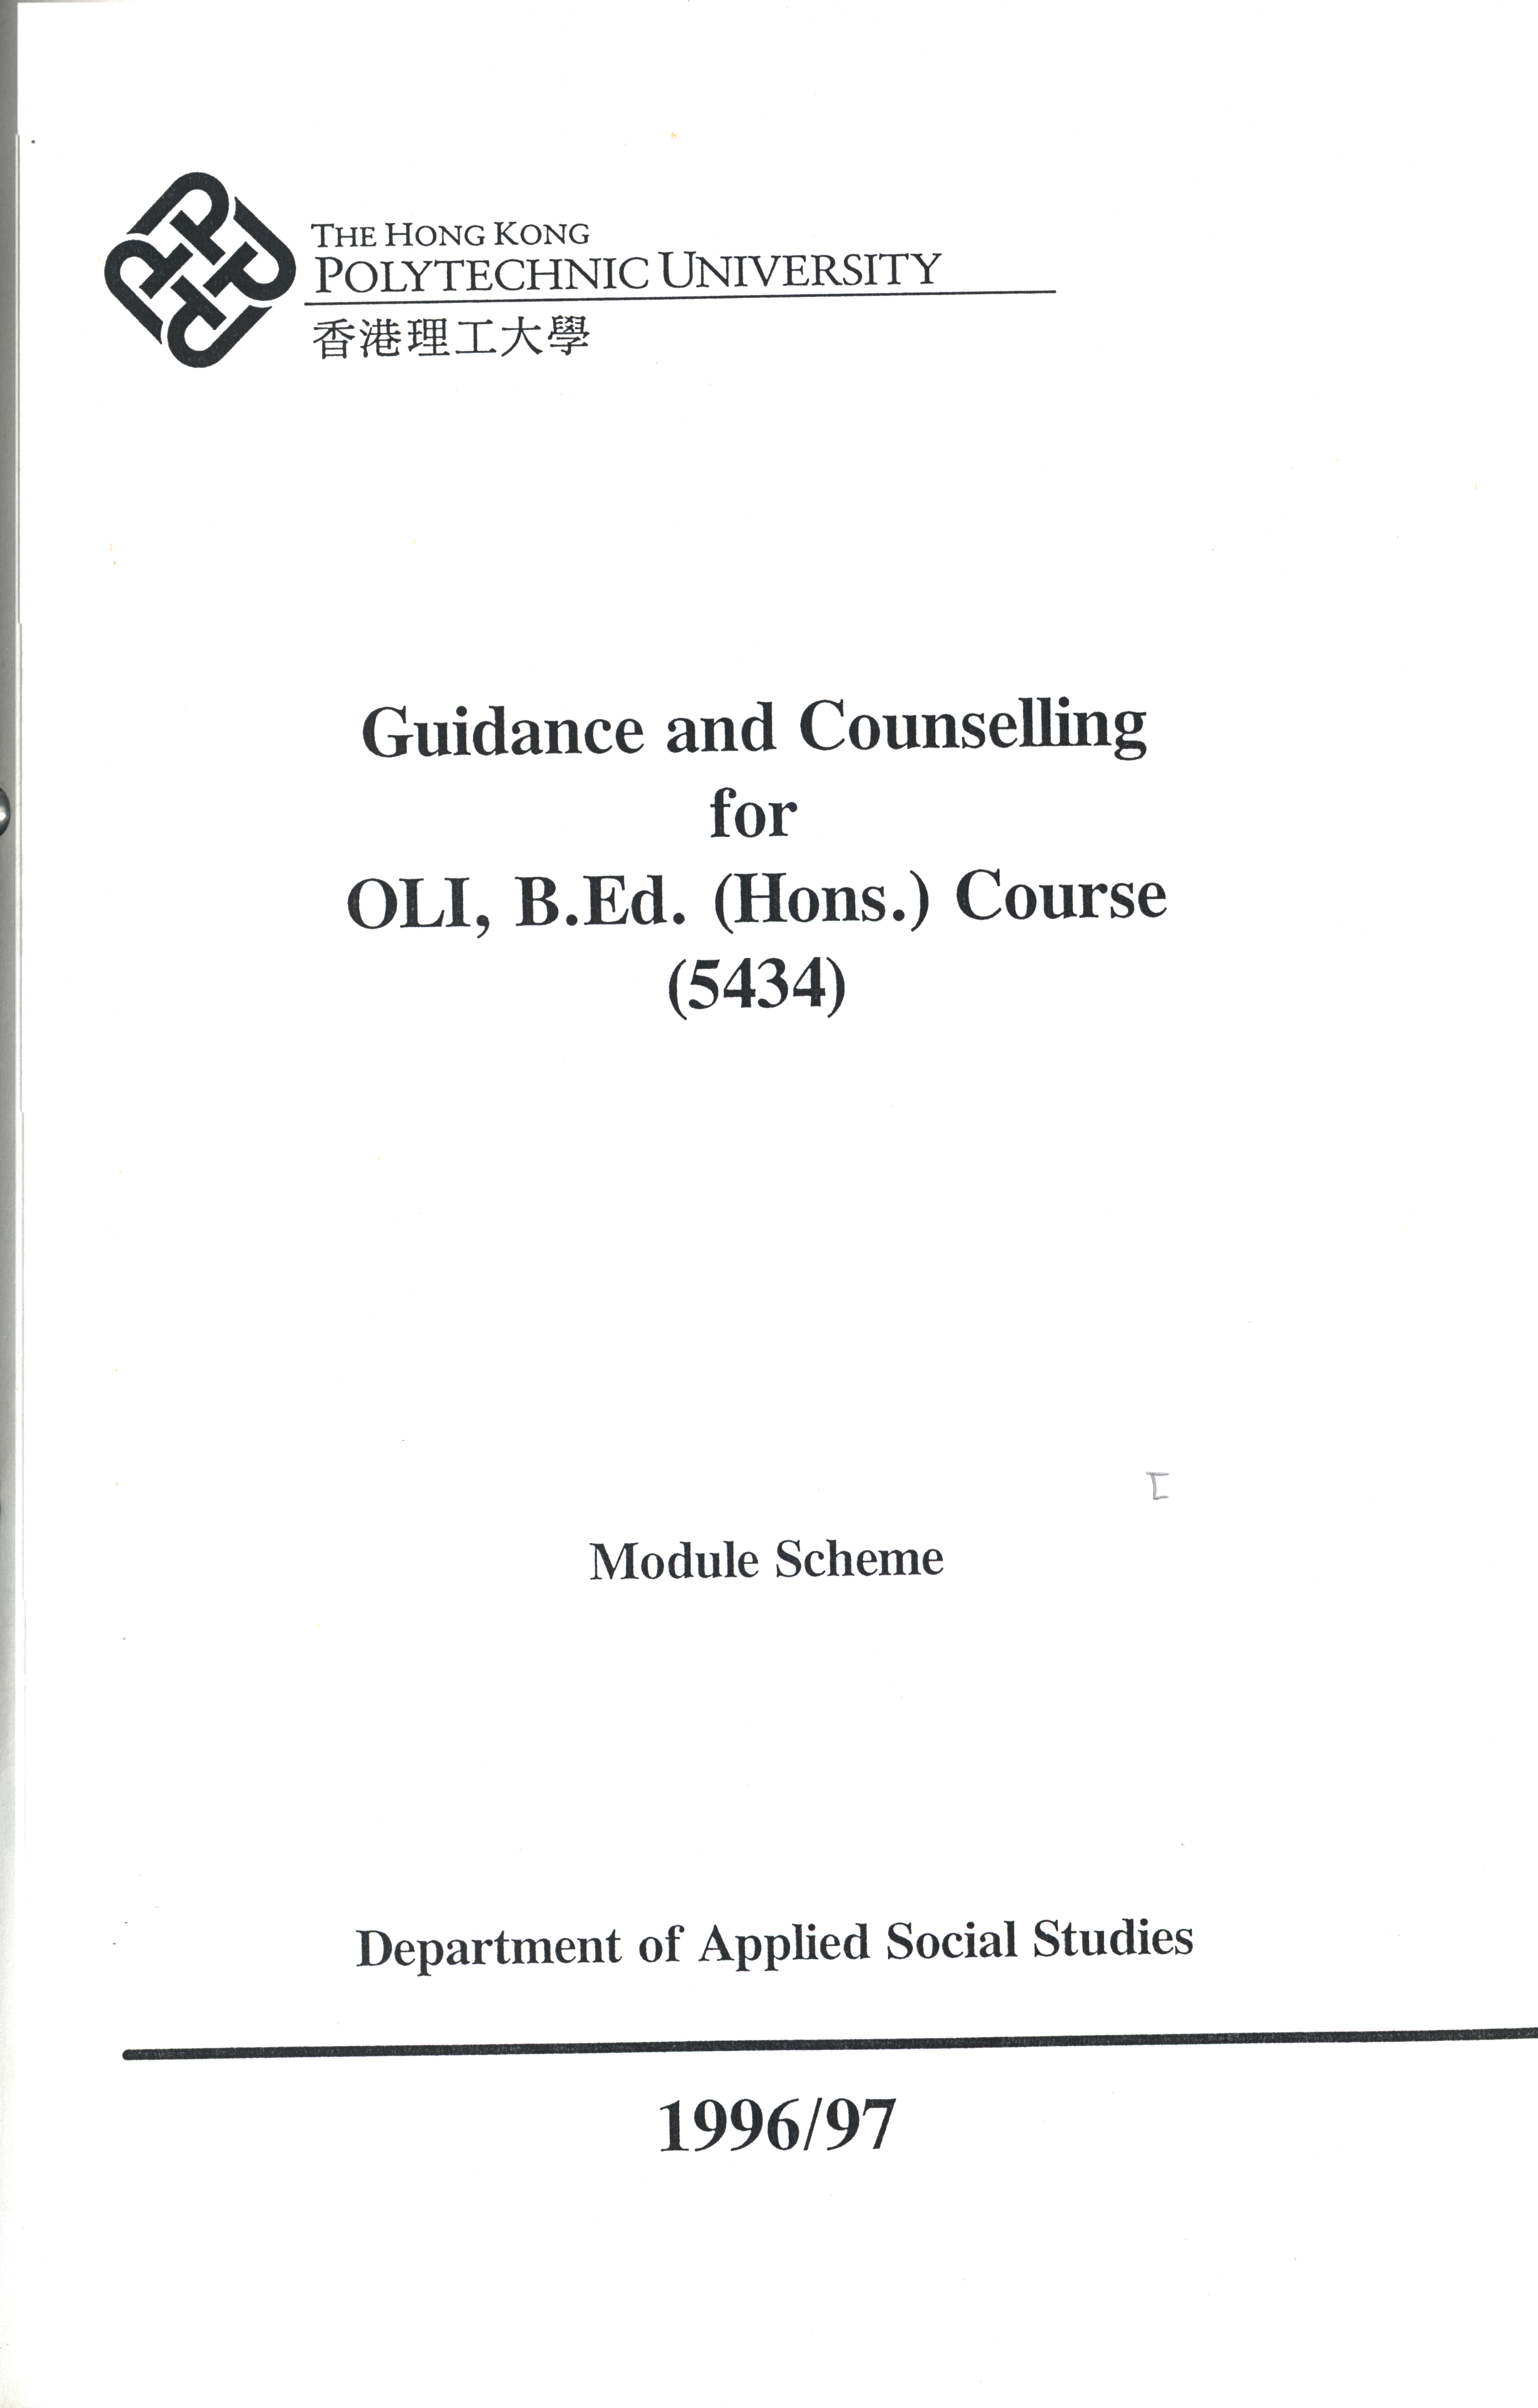 Module scheme. 5434, Guidance and counselling for OLI,B.Ed.(Hons.) course [1996/97]